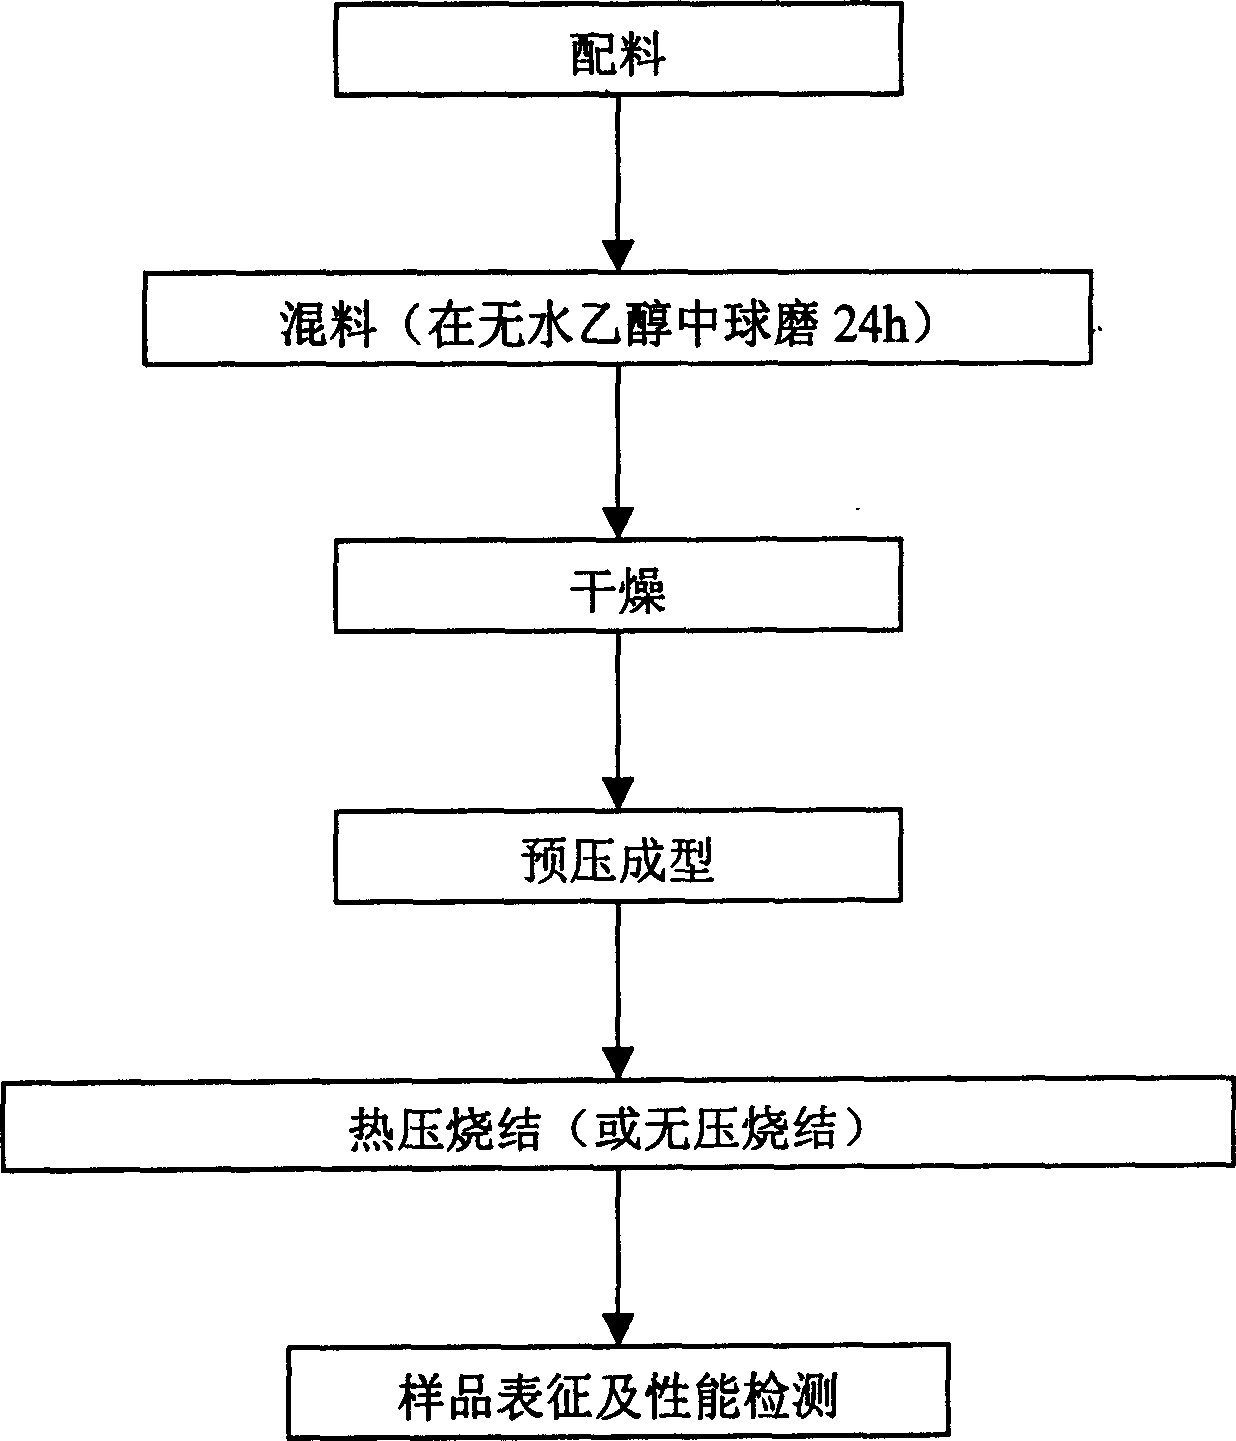 Aluminum magnesium oxynitride/boron nitride diphase refractory materials and preparing process thereof